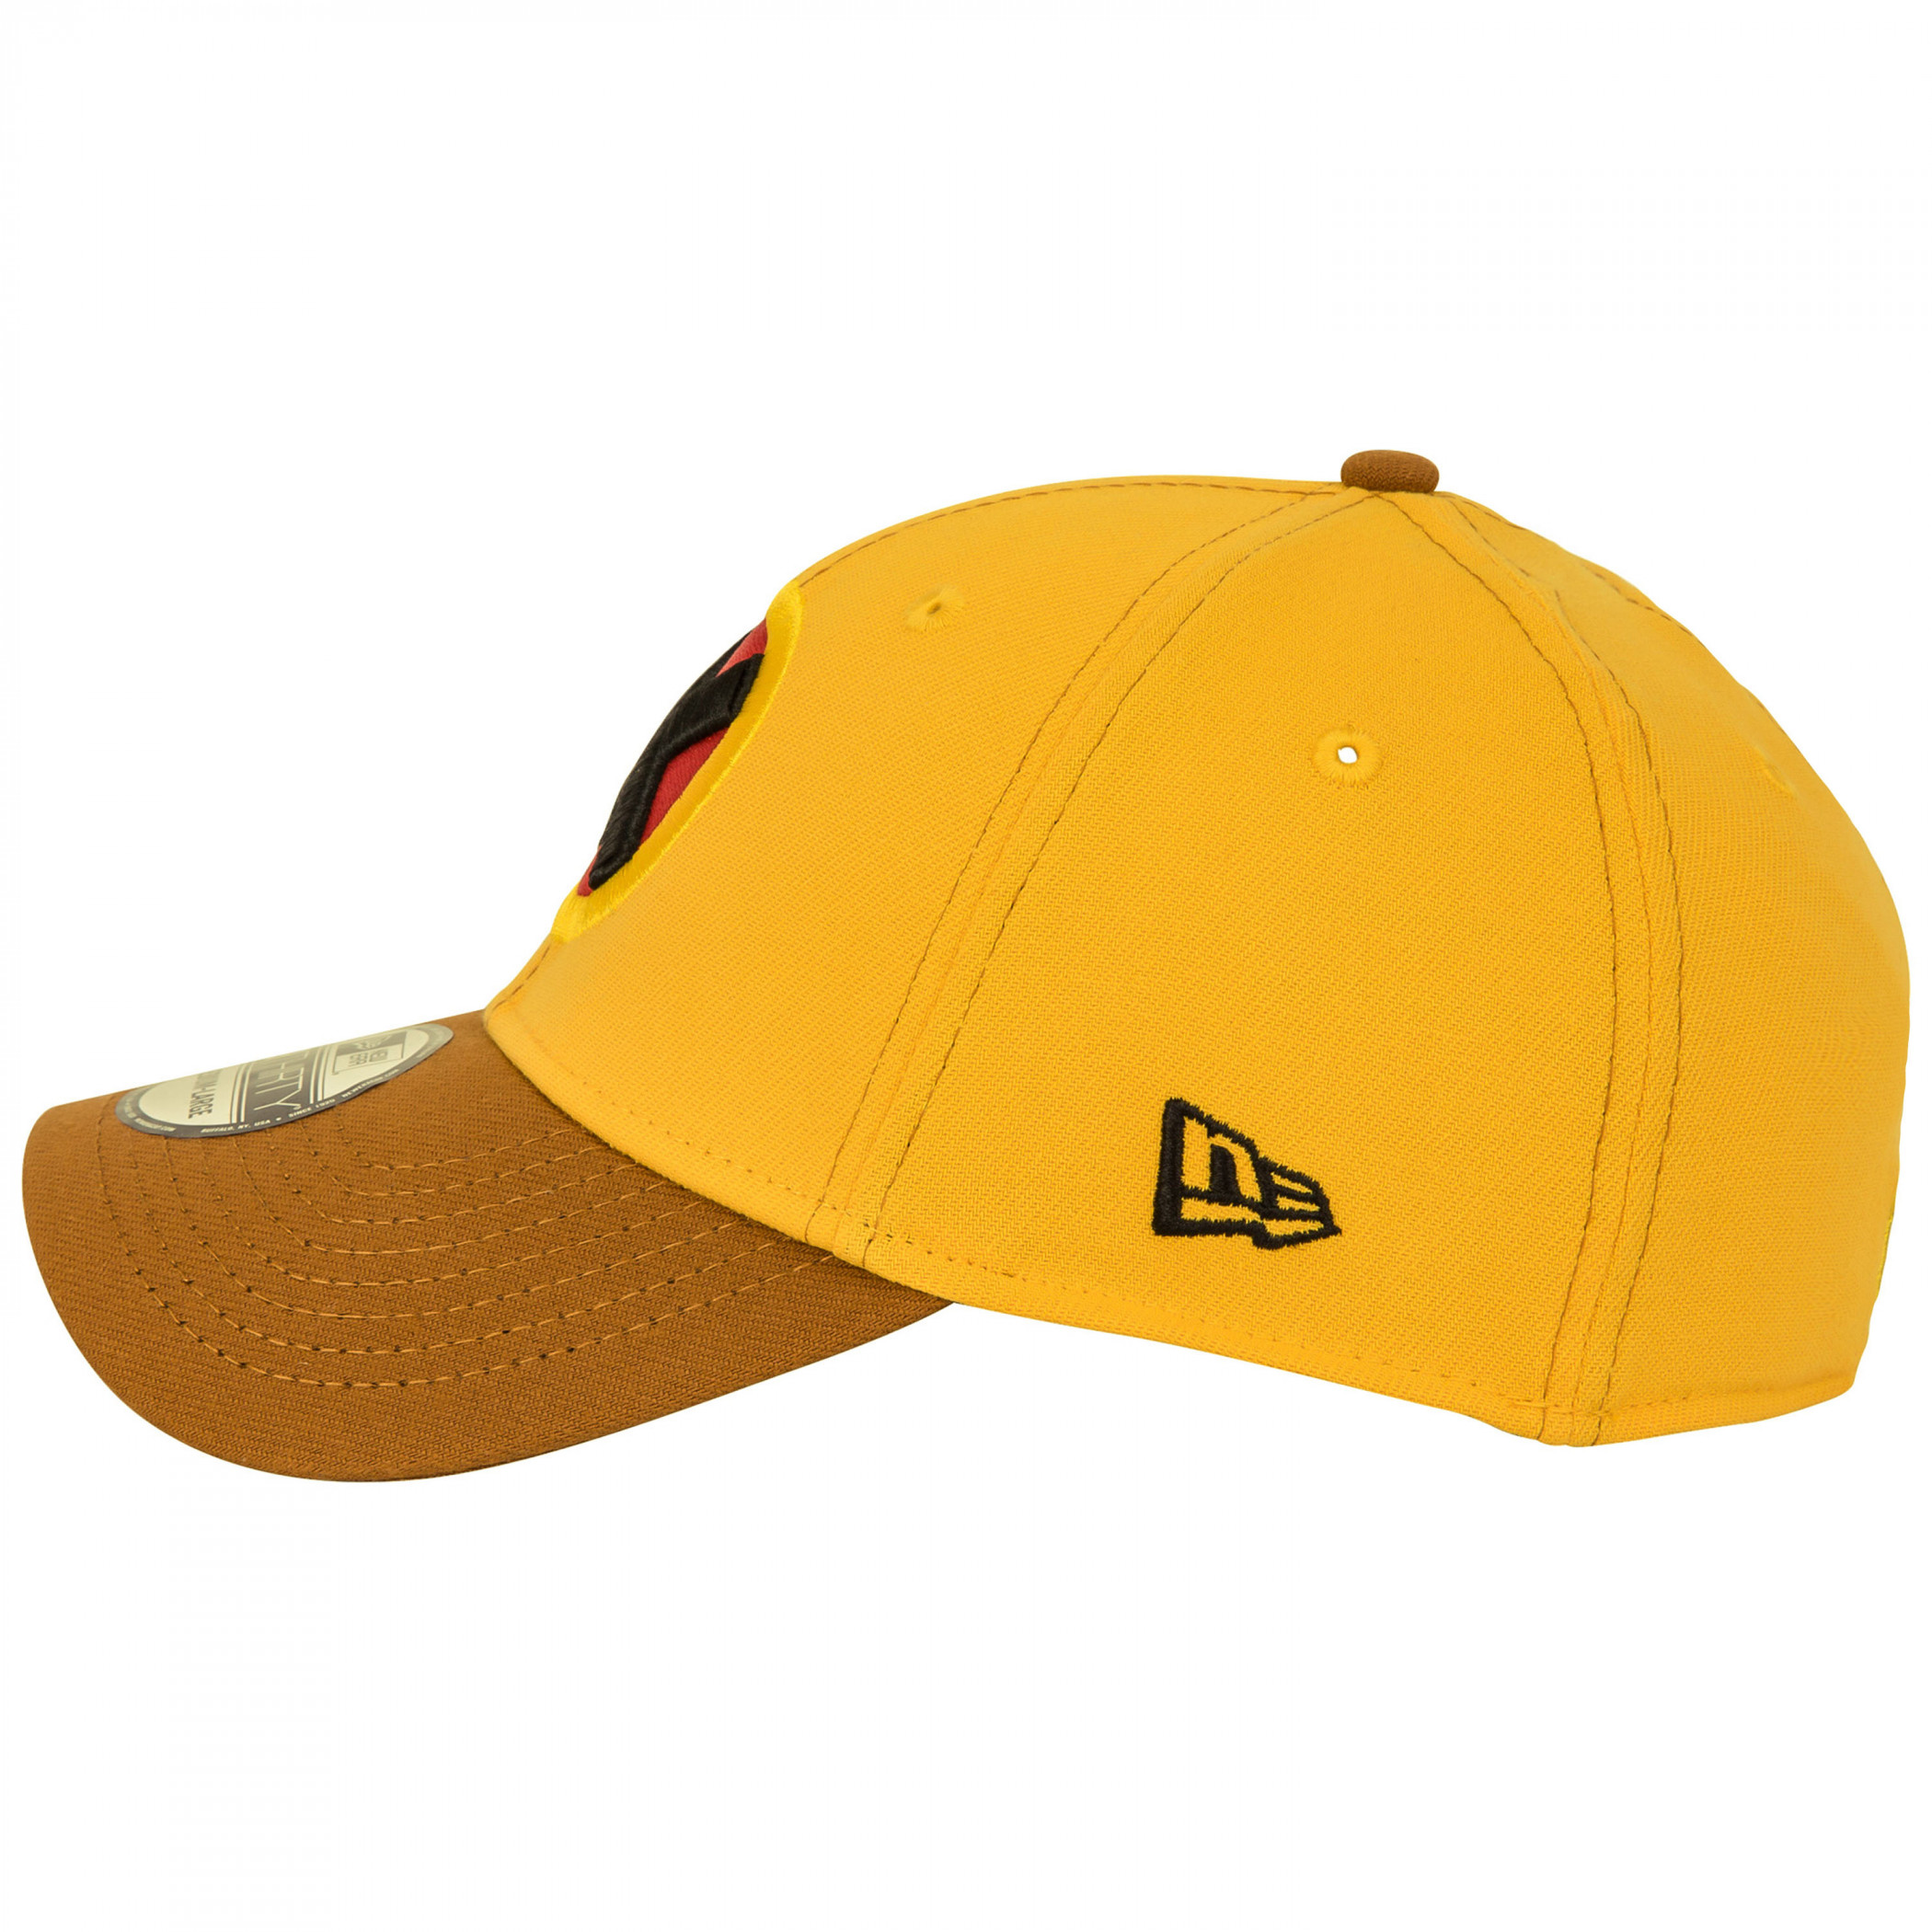 Wolverine Uncanny X-Men Yellow & Brown New Era 39Thirty Fitted Hat